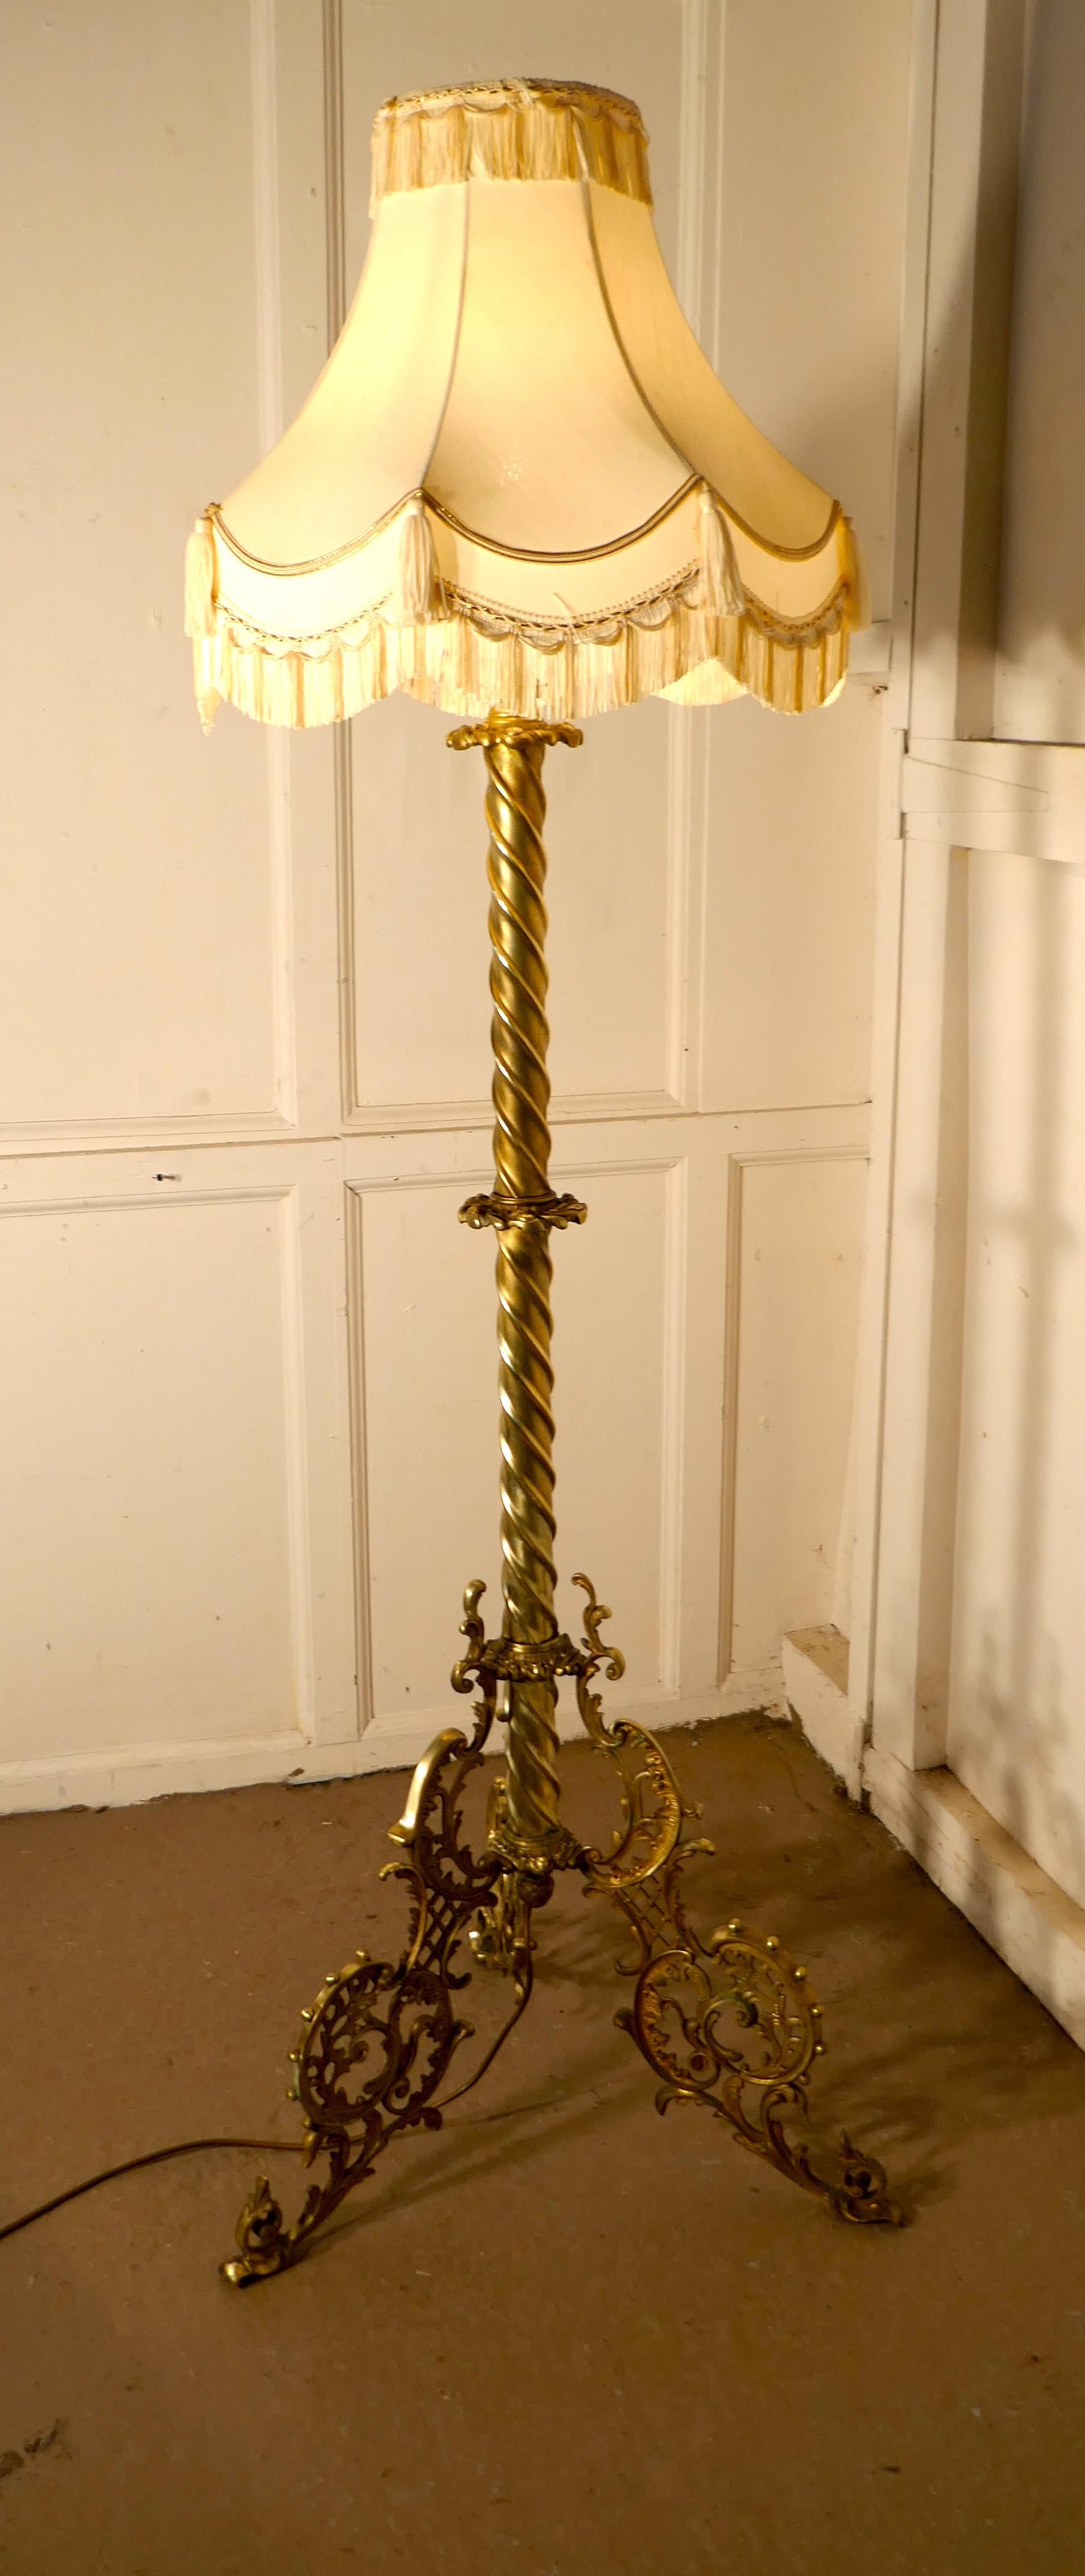 Adjustable brass floor lamp rococo standard lamp

This is a very attractive piece, the lamp has a telescopic action, with a decorative wrought brass base and a rope twisted upright that can be extended to raise the height of the lamp
I have shown